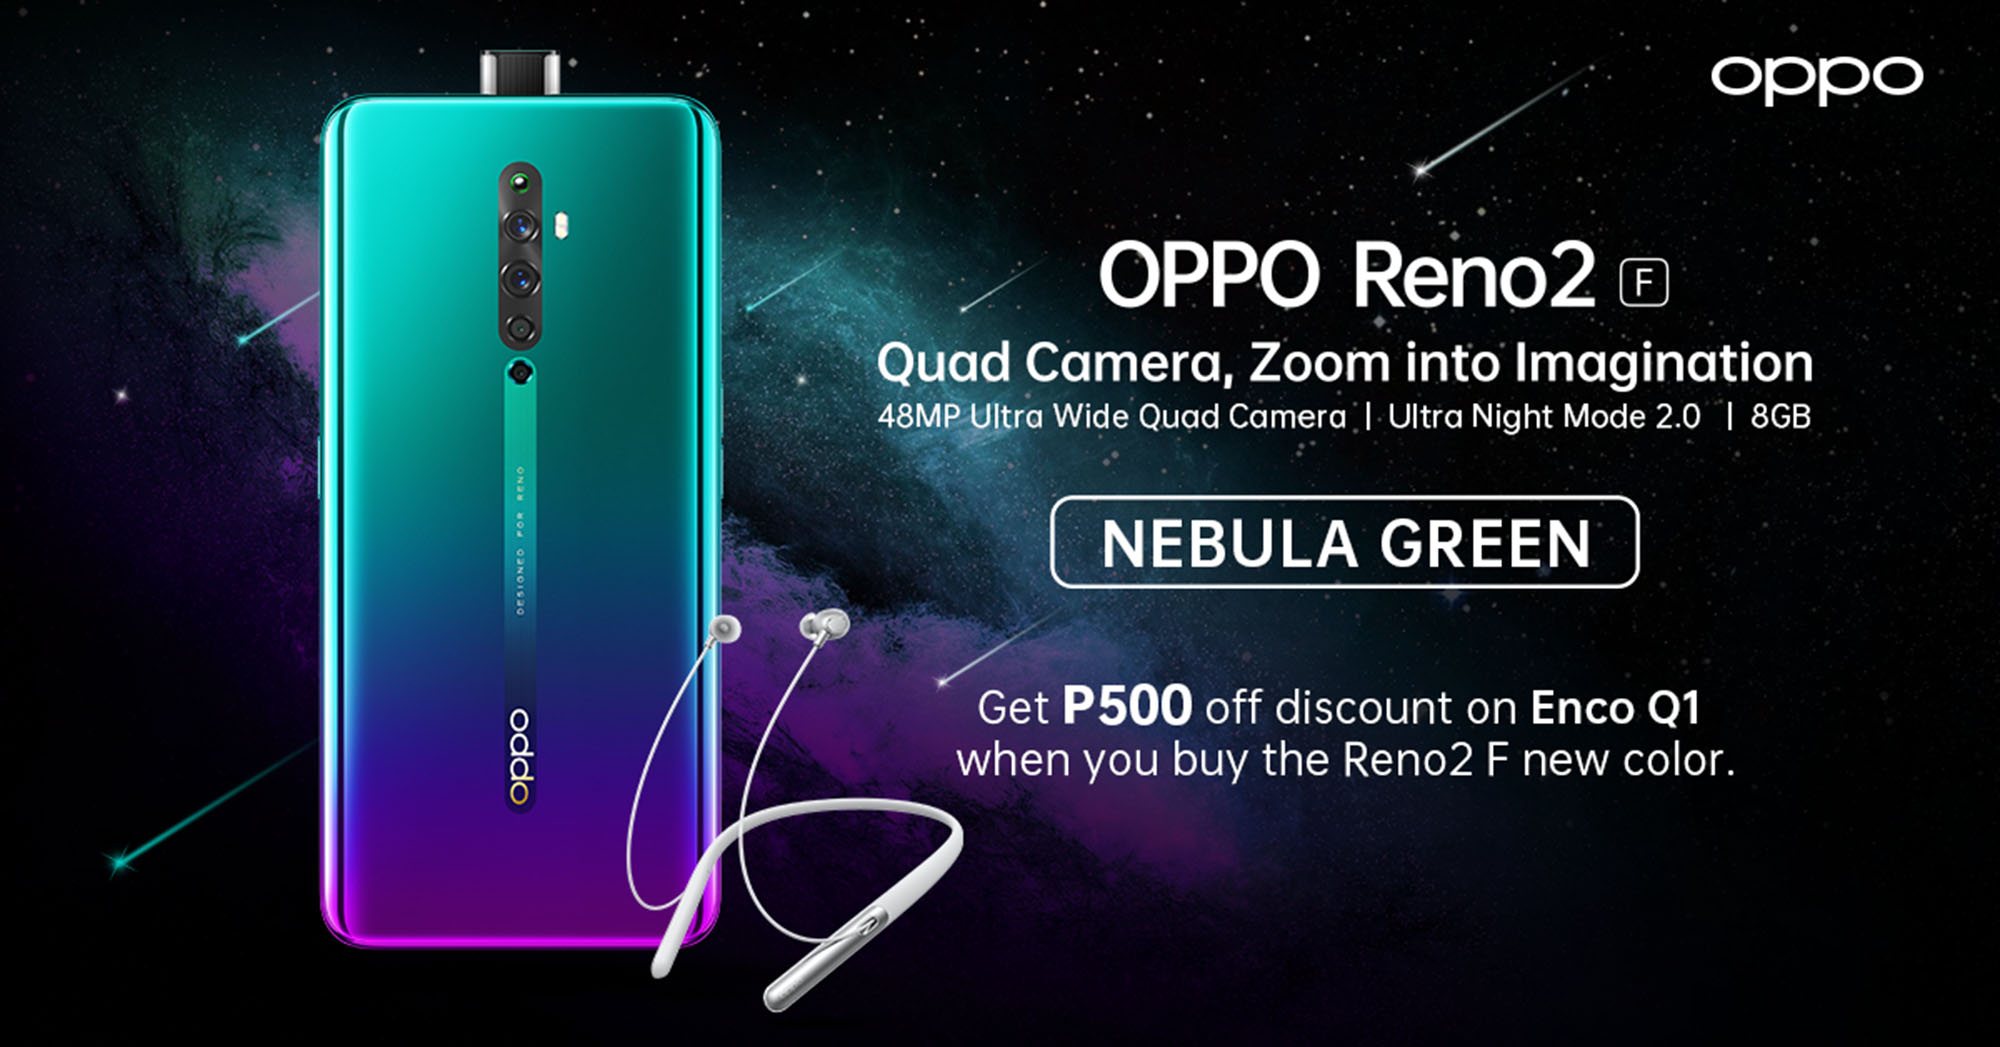 OPPO ushers in a new generation of the F Series beginning with the Reno2 F